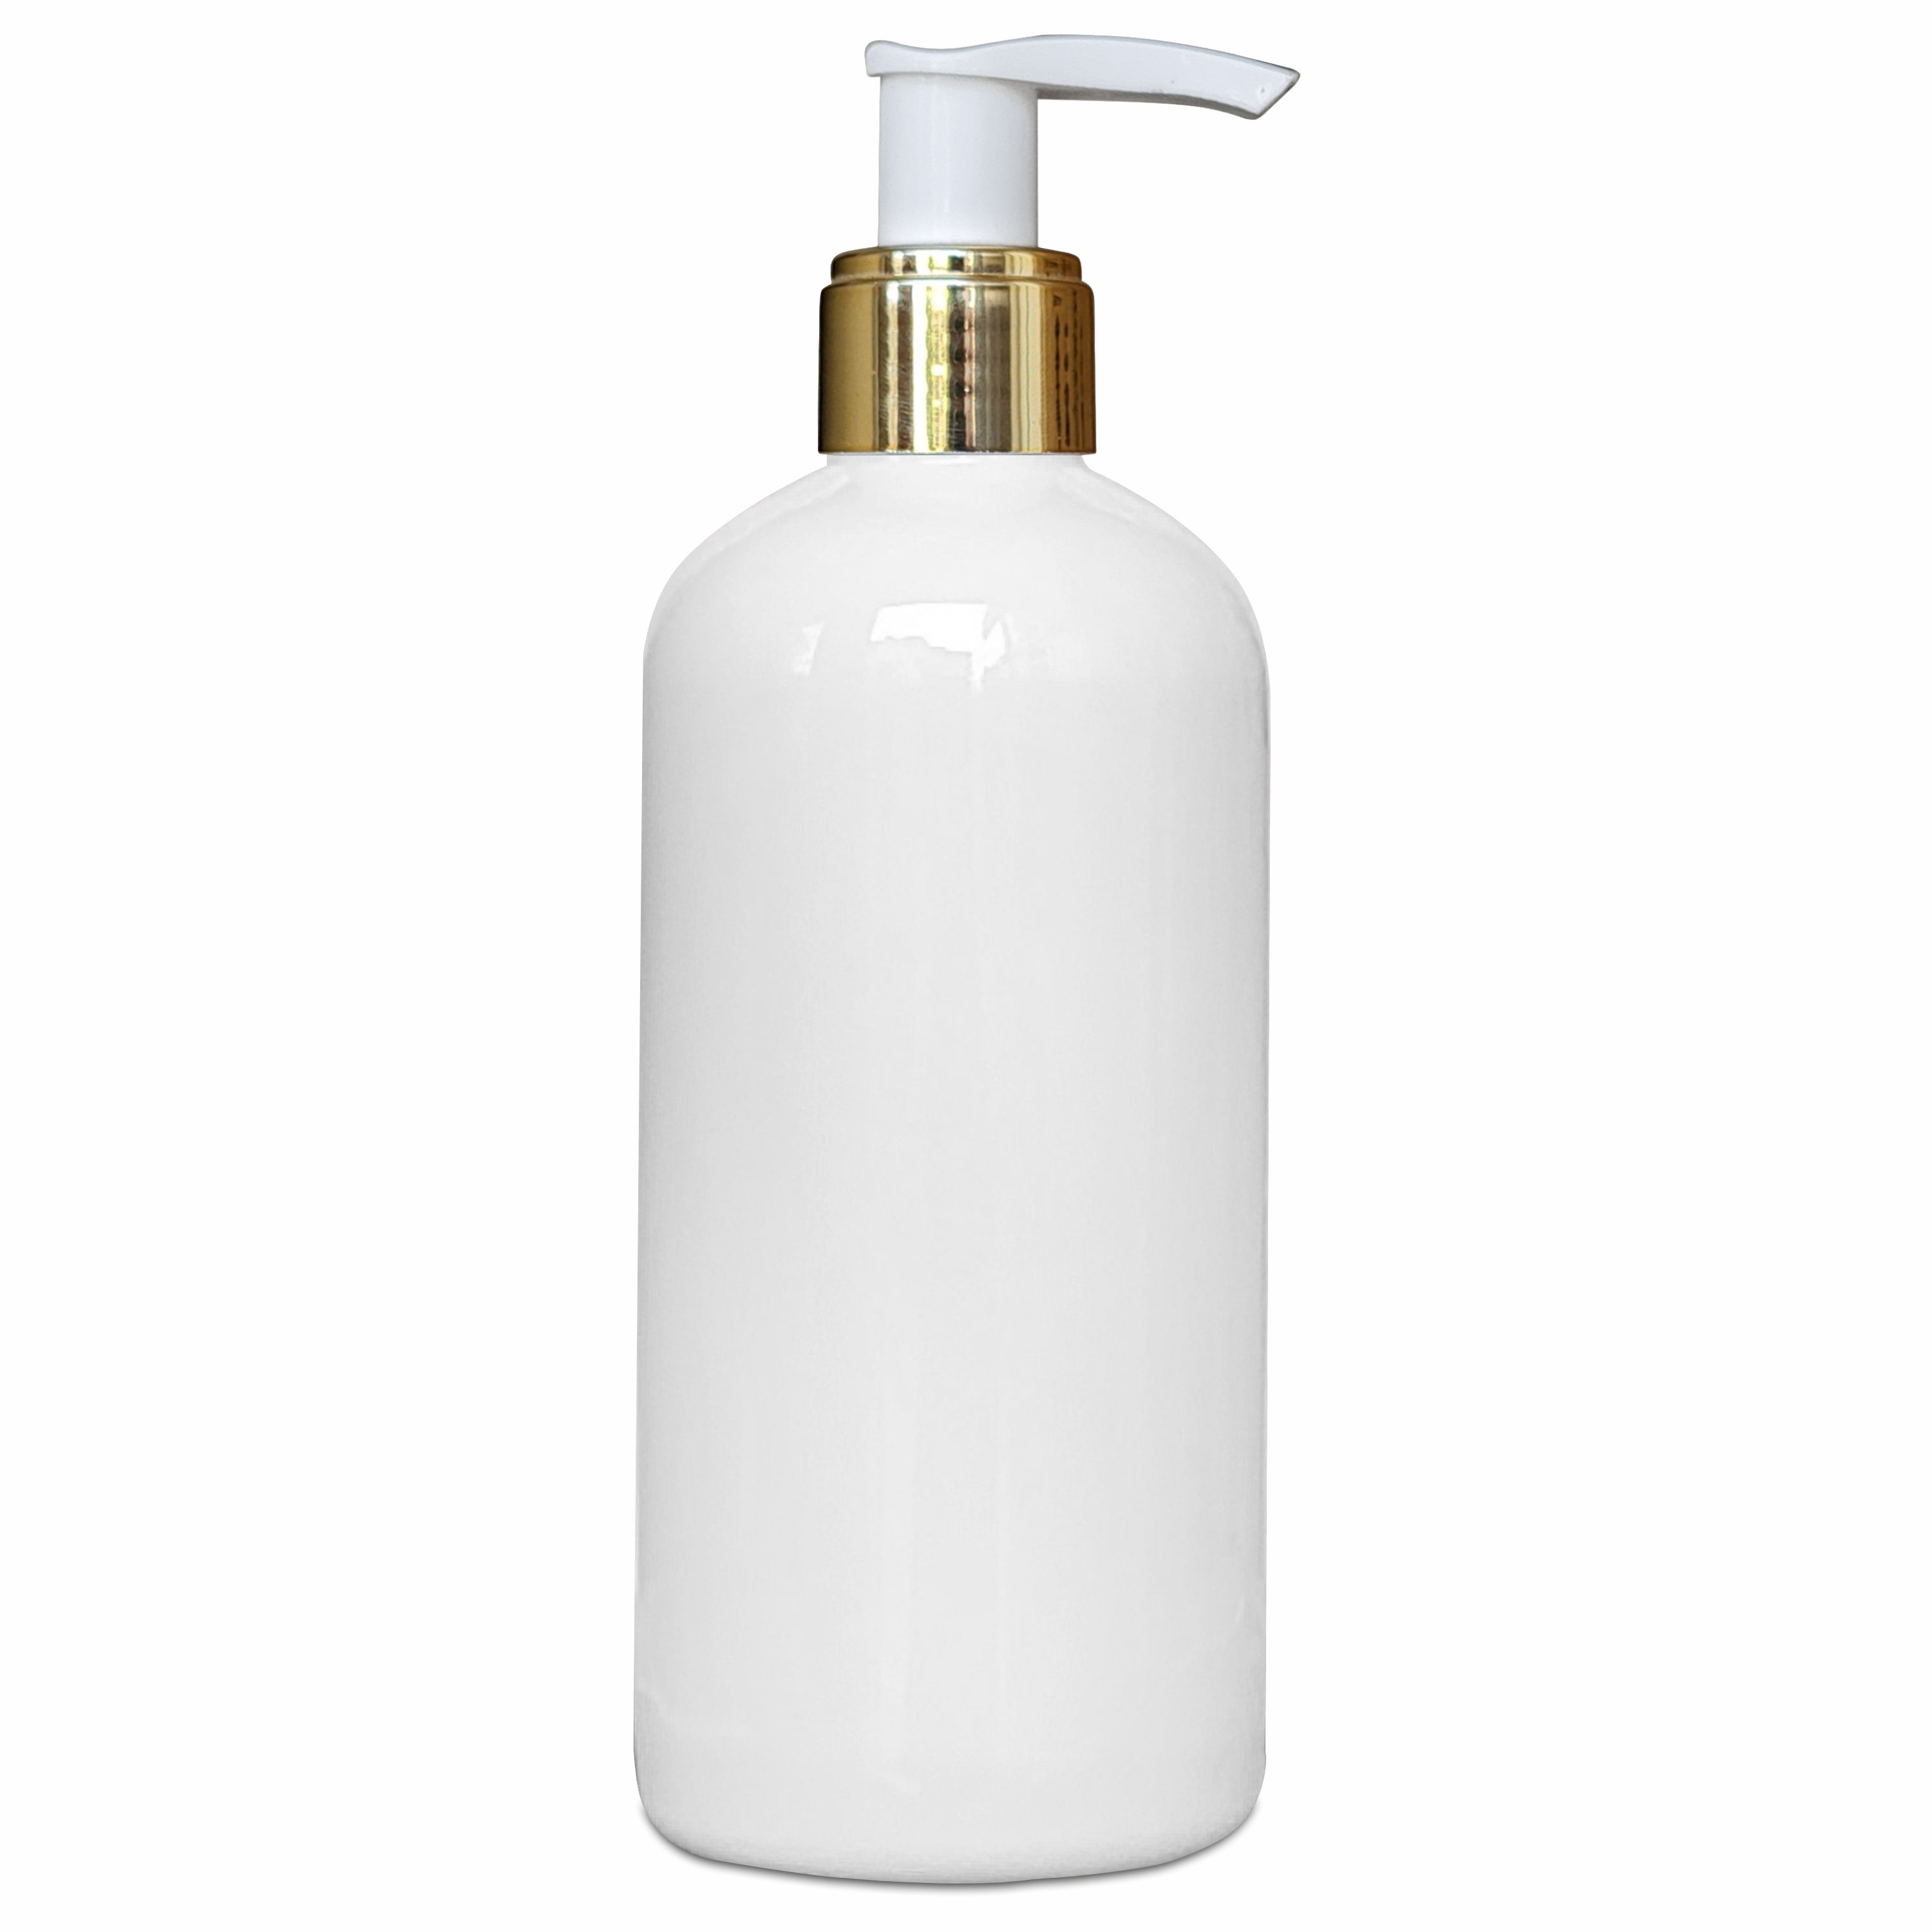 |ZMW74| MILKY WHITE ROUND SHAPE PET BOTTLE WITH GOLD PLATED WHITE COLOR DISPENSER PUMP Available Size: 300ml